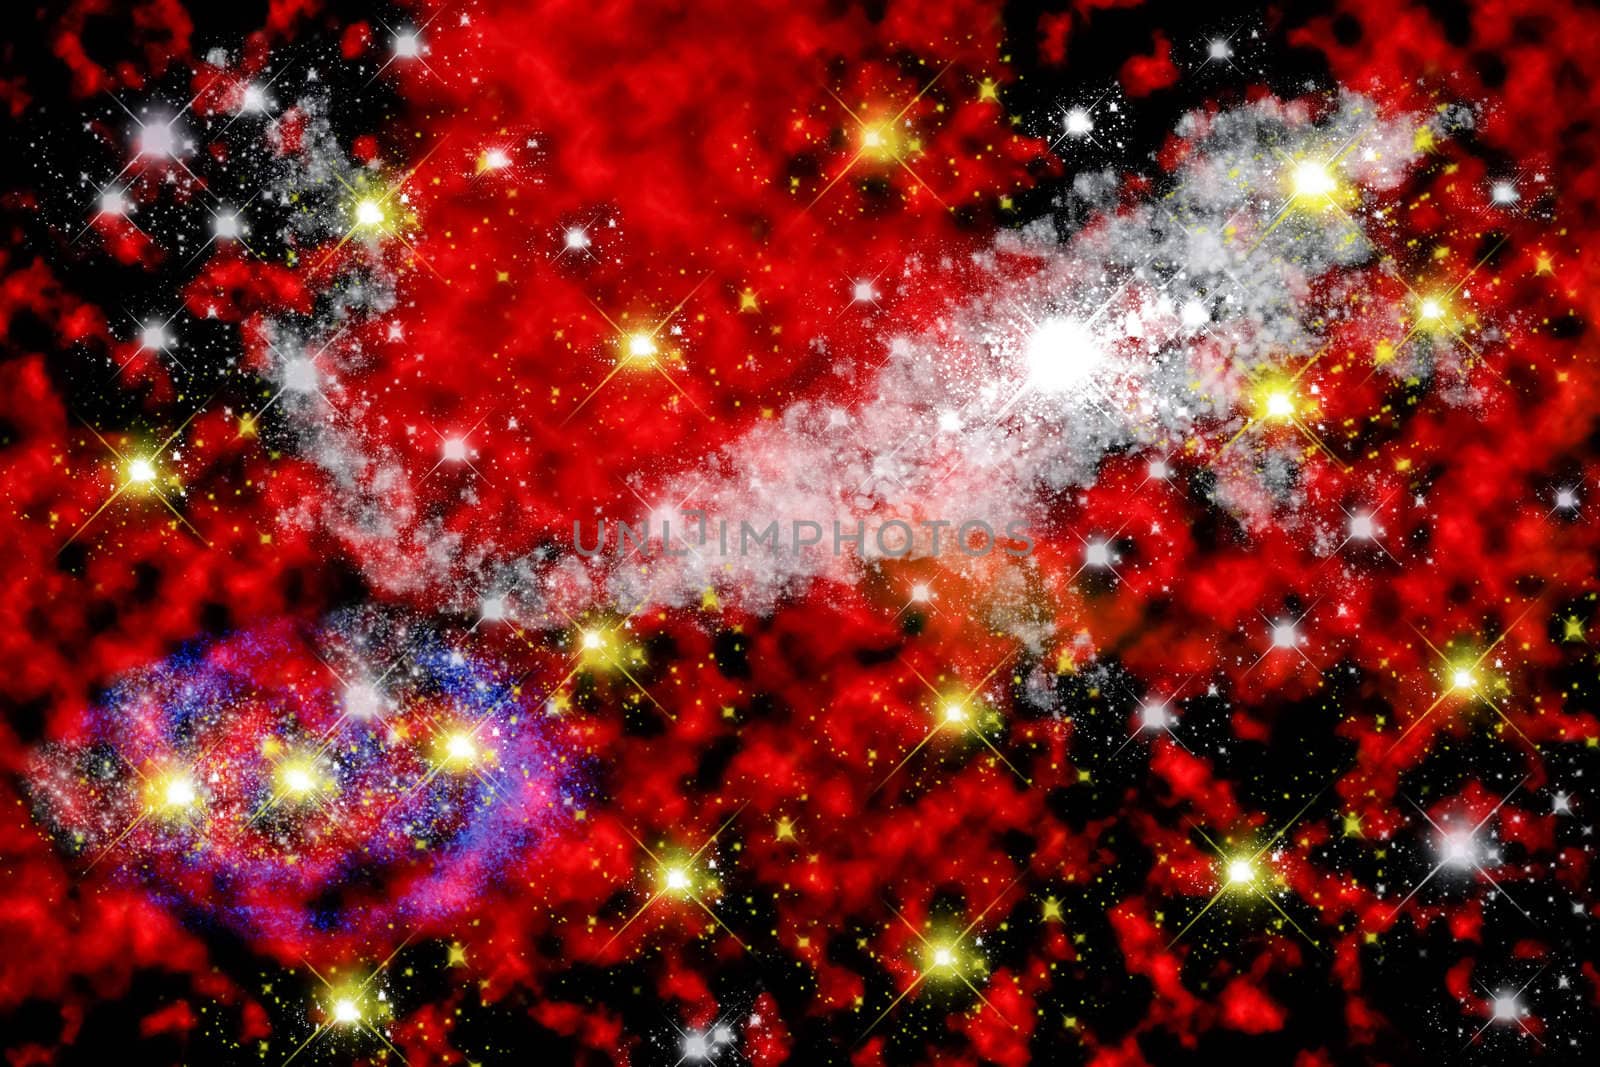 Galaxy, nabular, cosmic dust from outer space in fantasy.